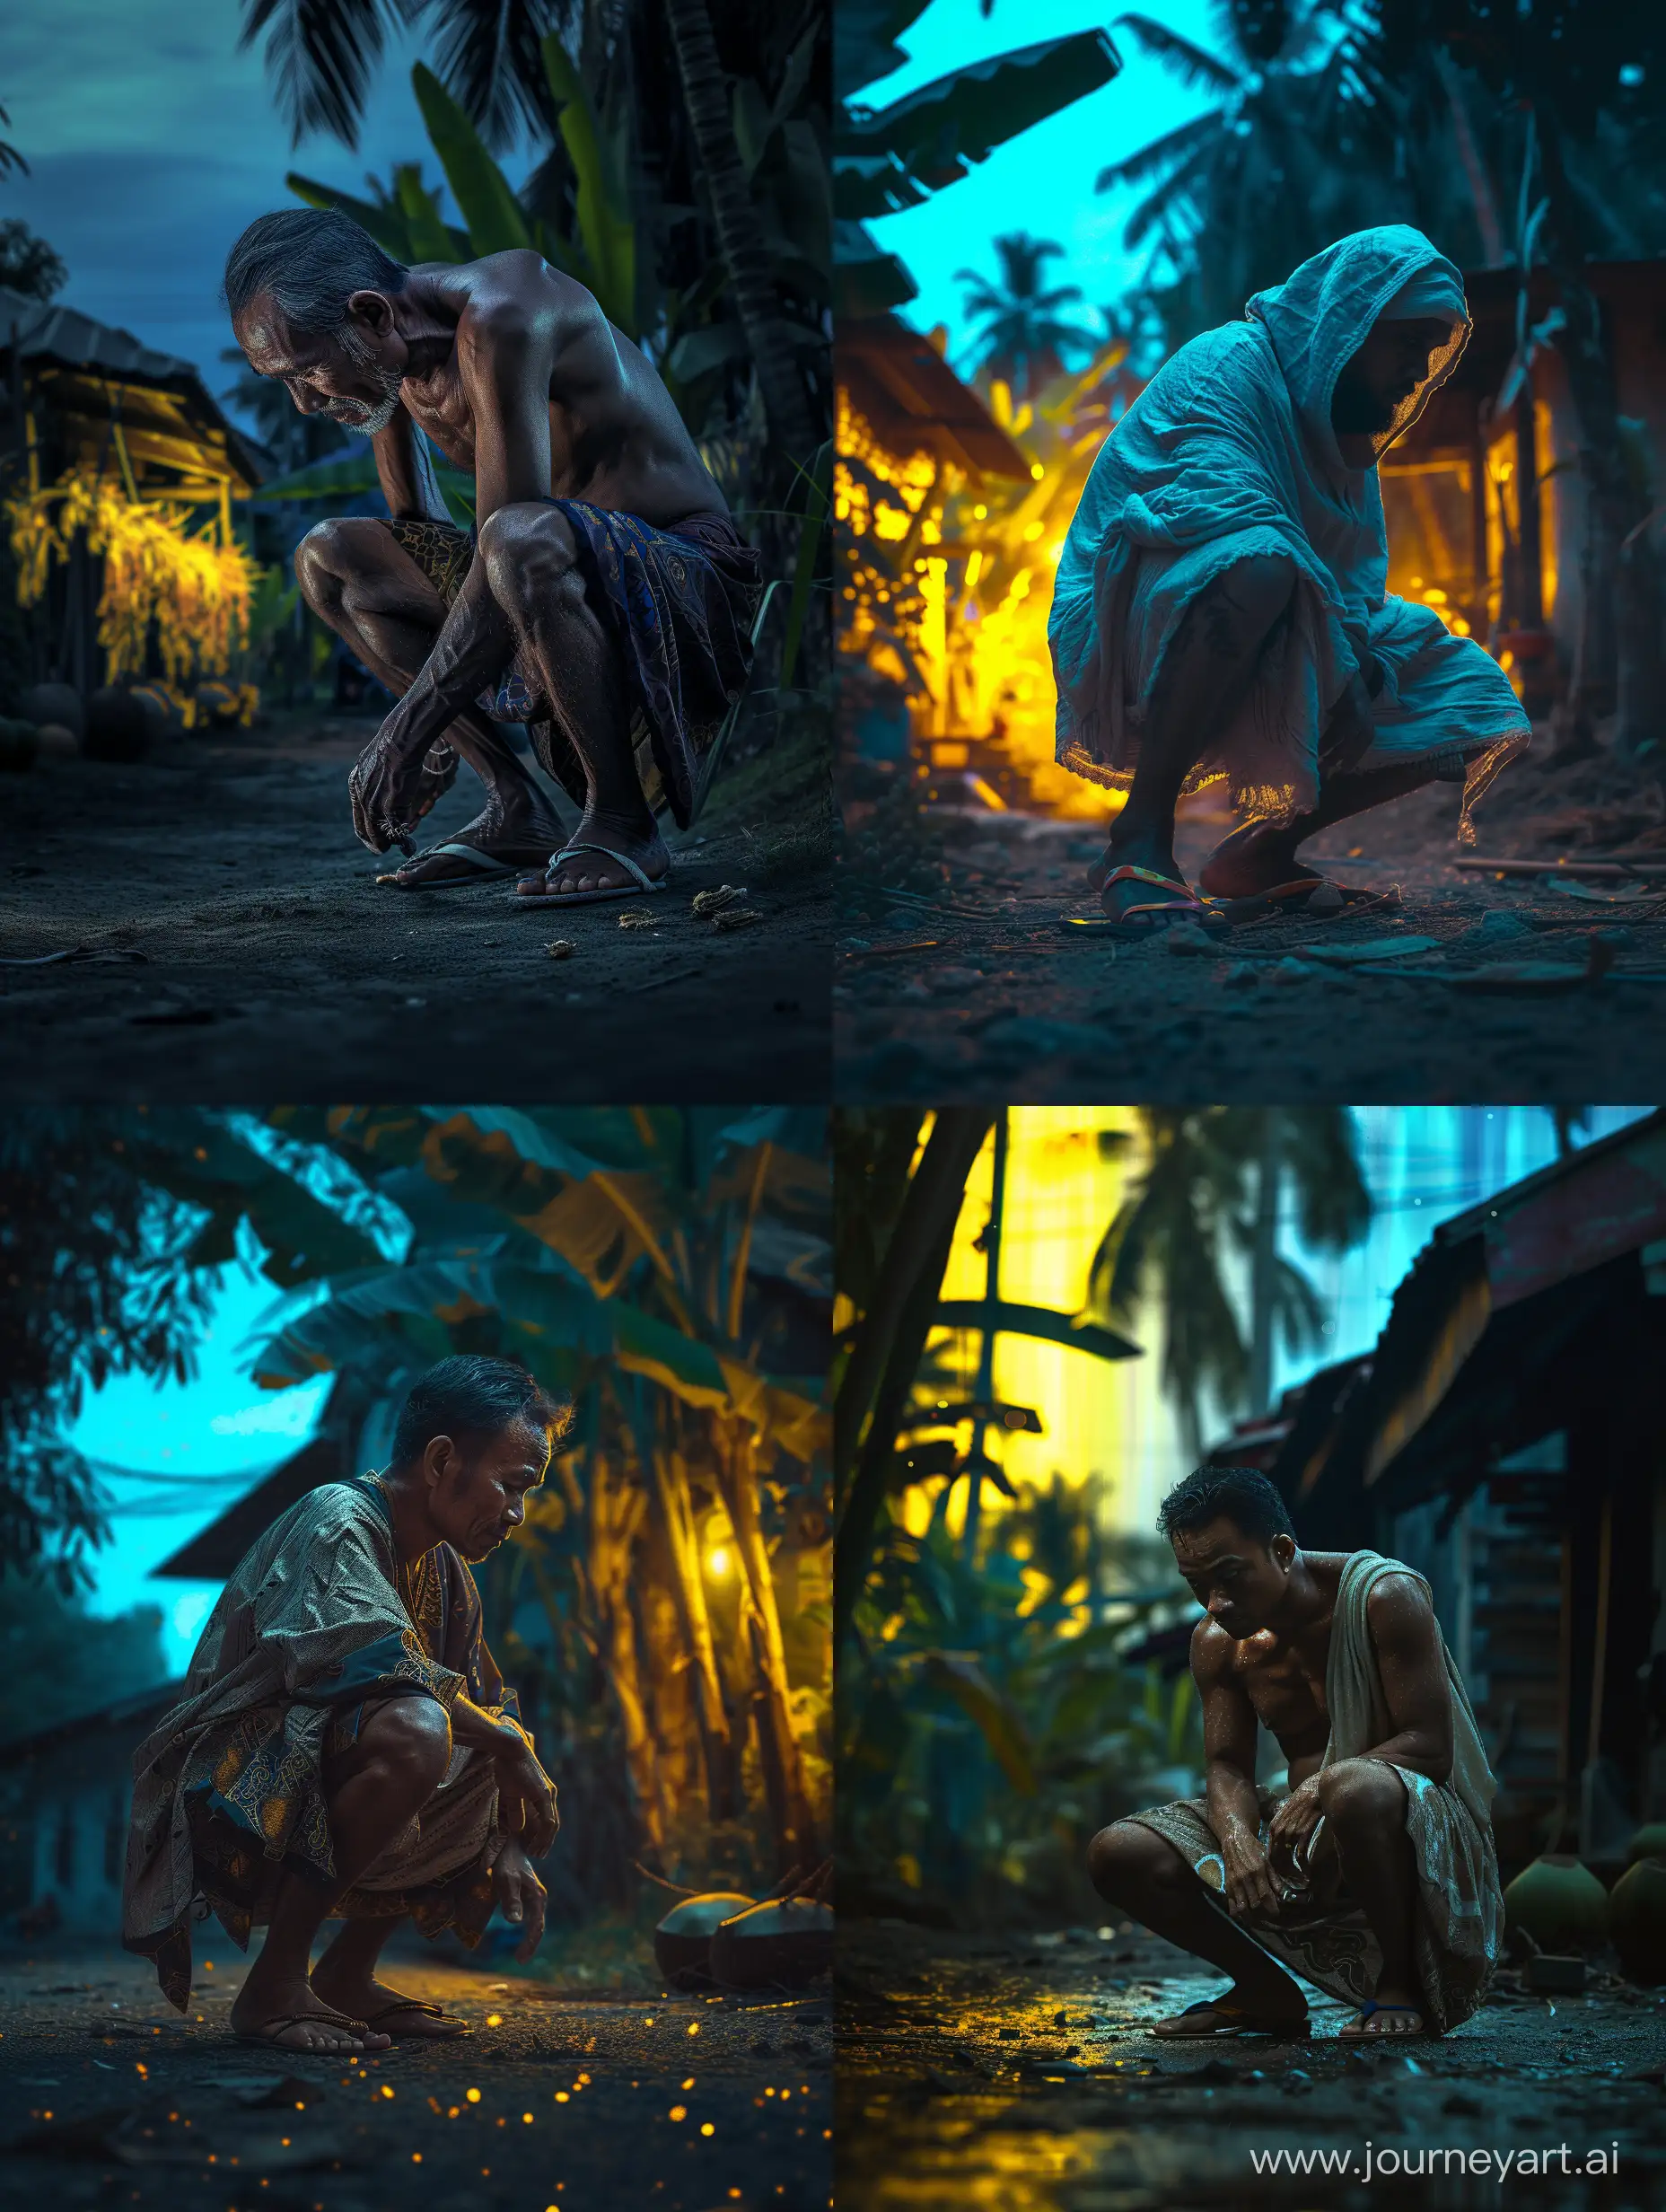 ultra realistic, a mighty man. wearing Malay clothes and sarong cloth, squatting and wearing sandals. walking in the dark dawn. behind there is only the refraction of yellow and blue lights. Malay village background. there are coconut trees and banana trees. canon eos-id x mark iii dslr --v 6.0